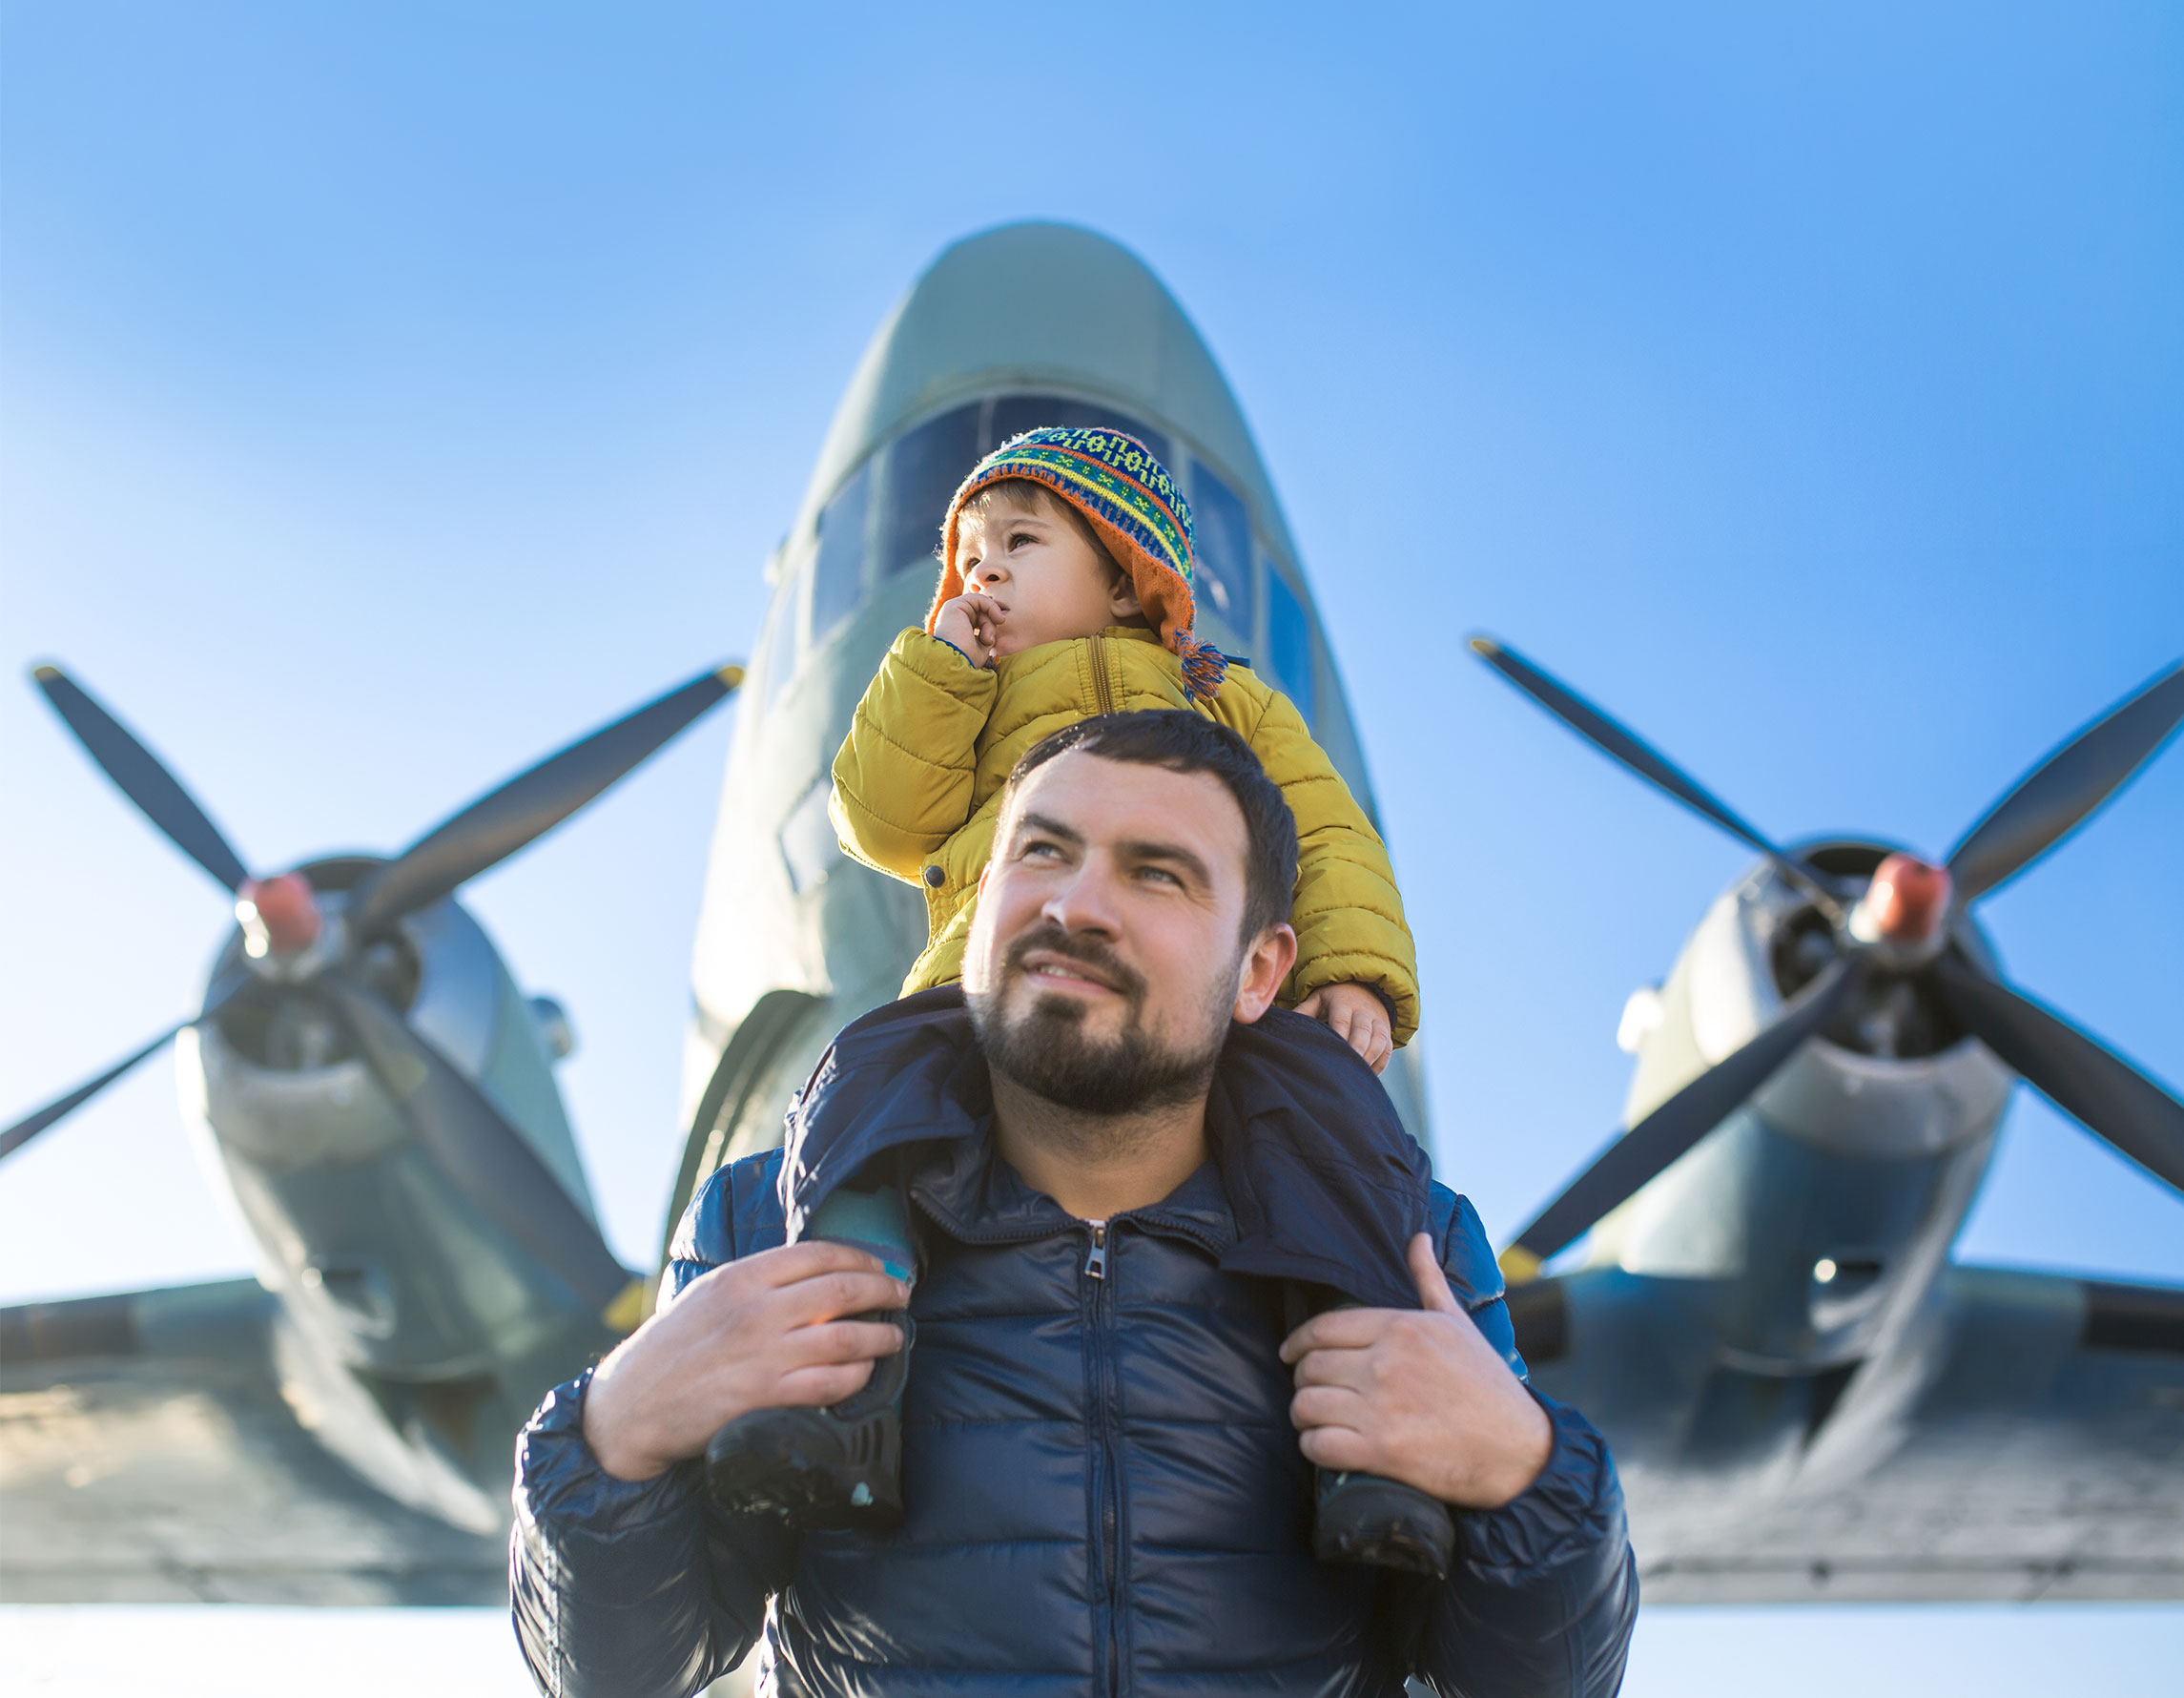 Little boy on dad's shoulders in front of airplane